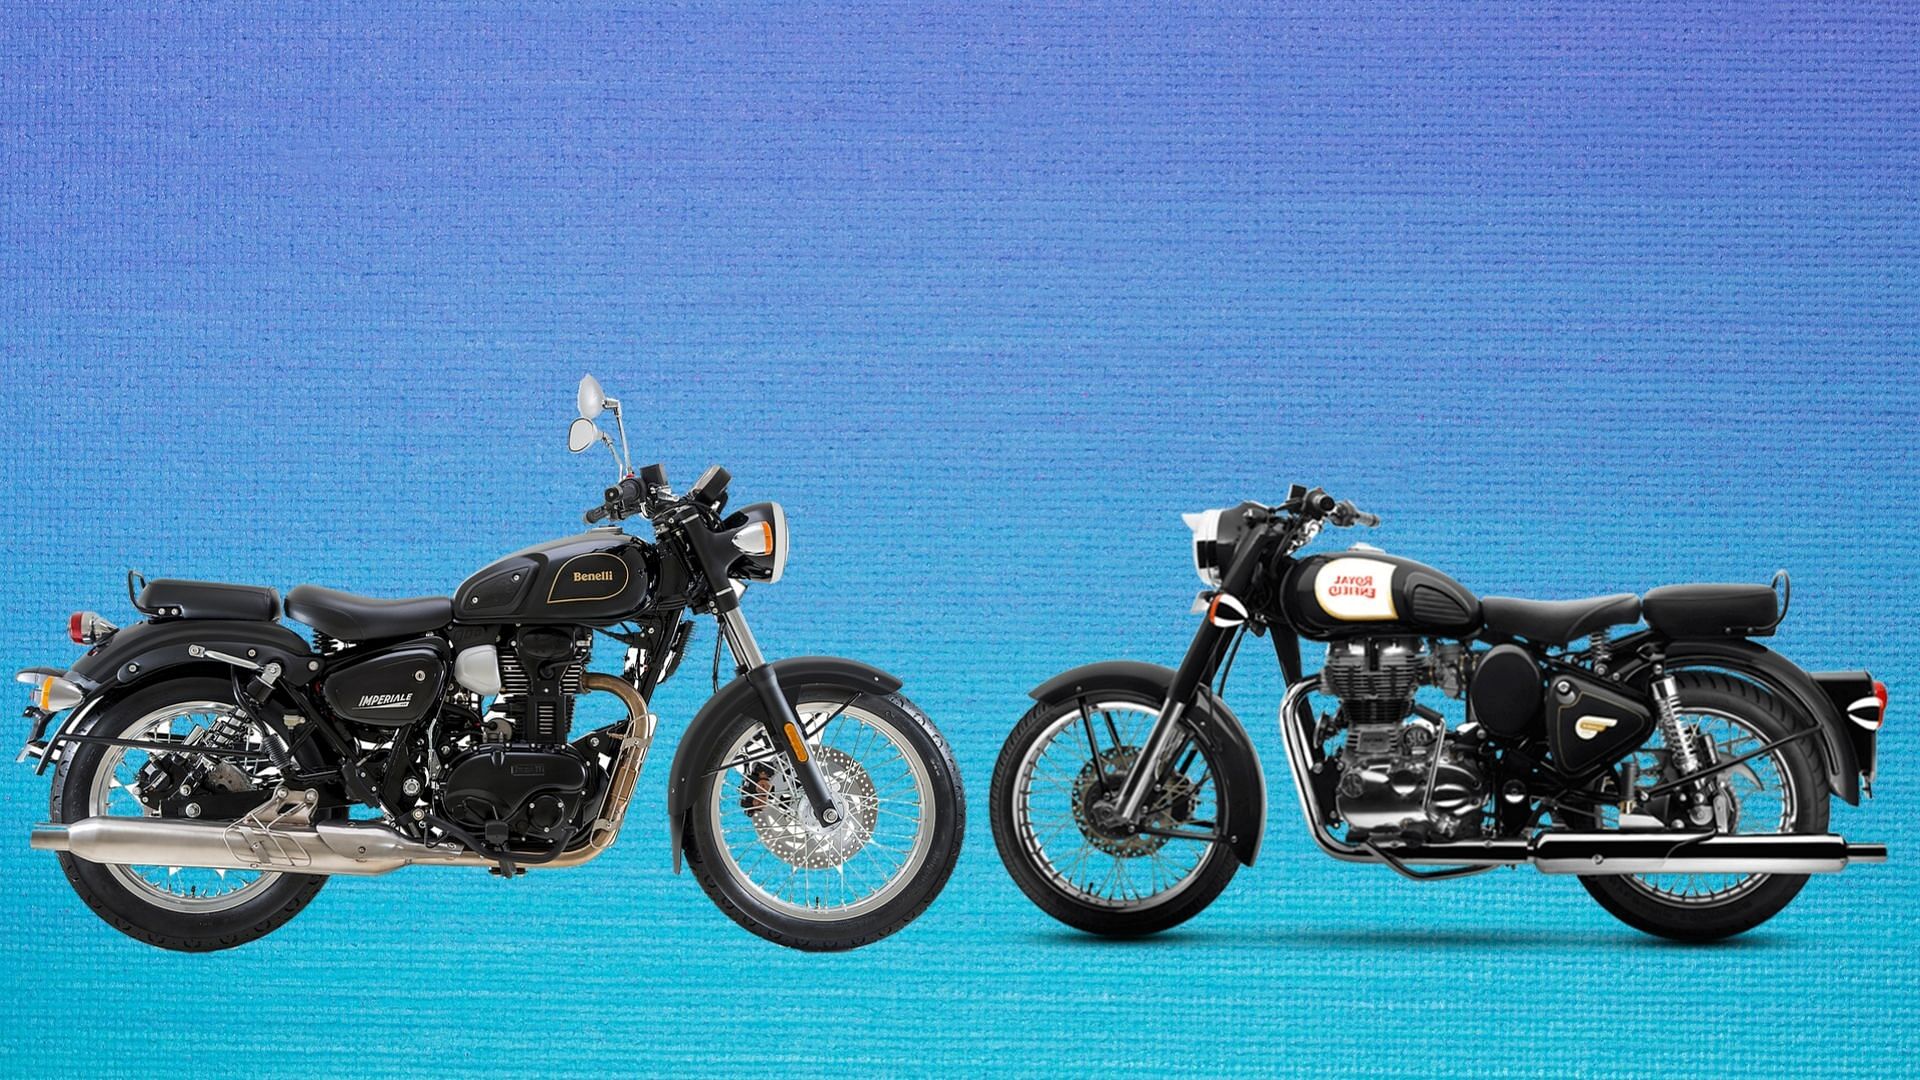 Benelli Imperiale 400 (left) vs Royal Enfield Classic 350 (right)